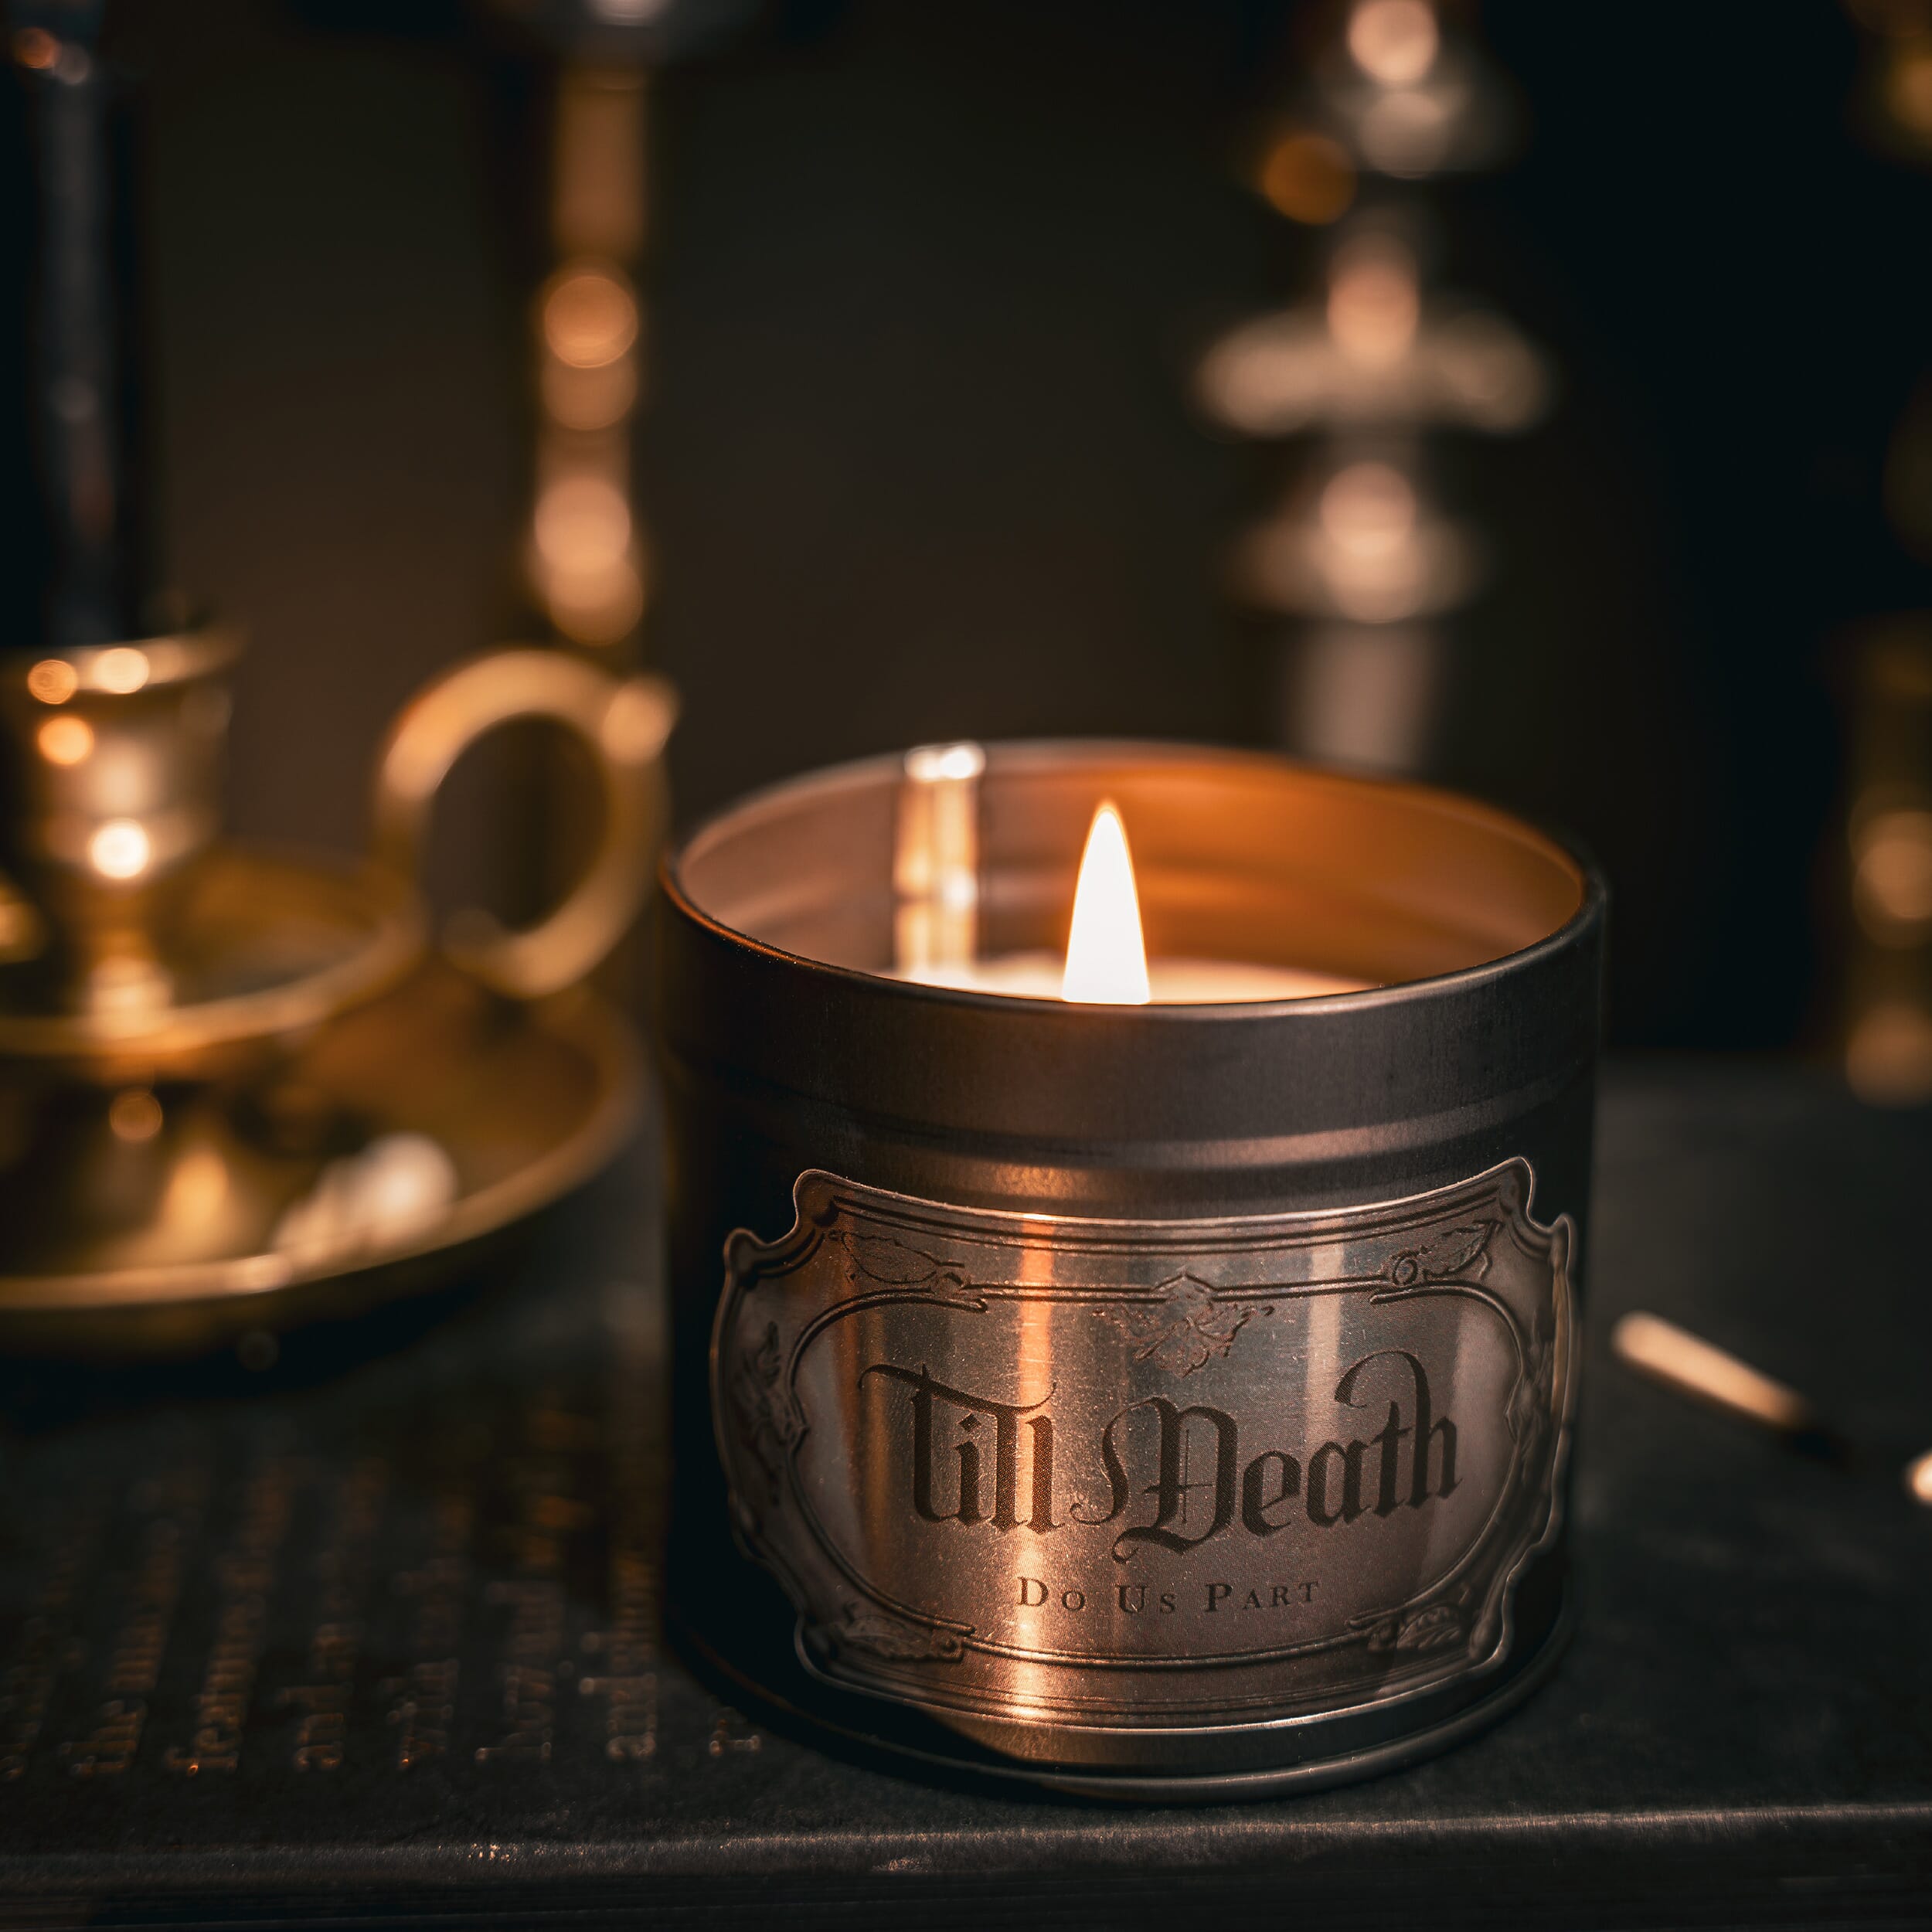 till death do us part gothic anniversary gothic wedding gift the blackened teeth gothic candles